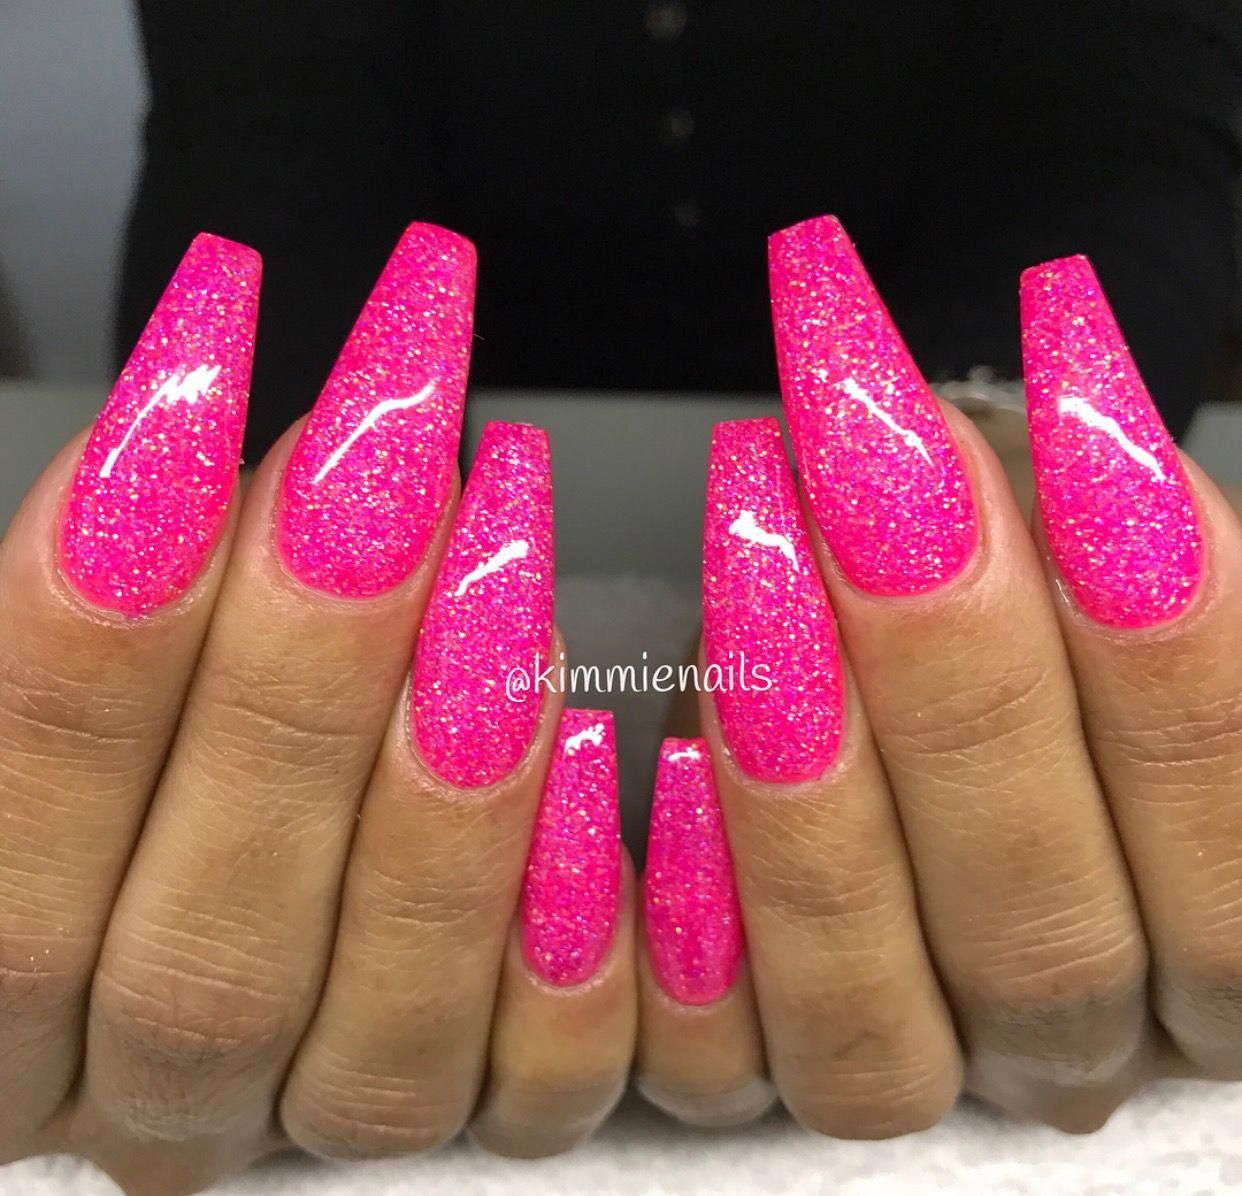 Kimmiesnails Book With Her And Follow Us Hair Nails And Style Pinknail Gelove Nehty Nehet Nehty